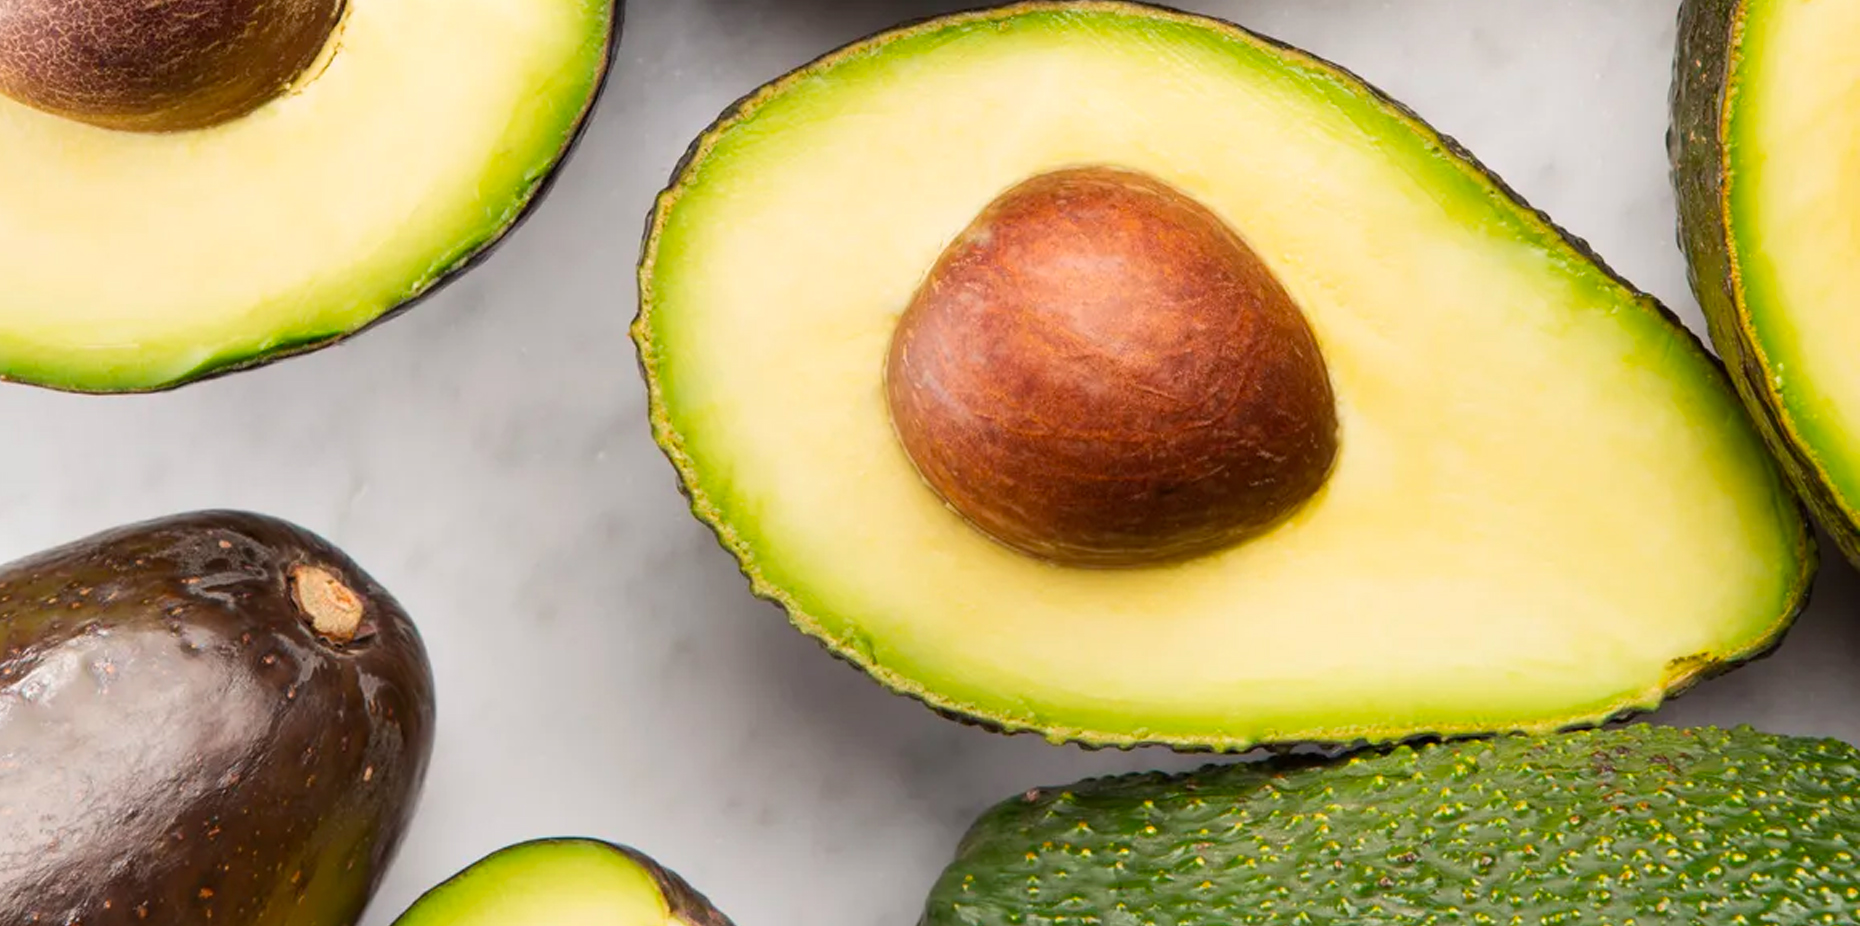 Avocado: Facts, Nutrition, Benefits and More